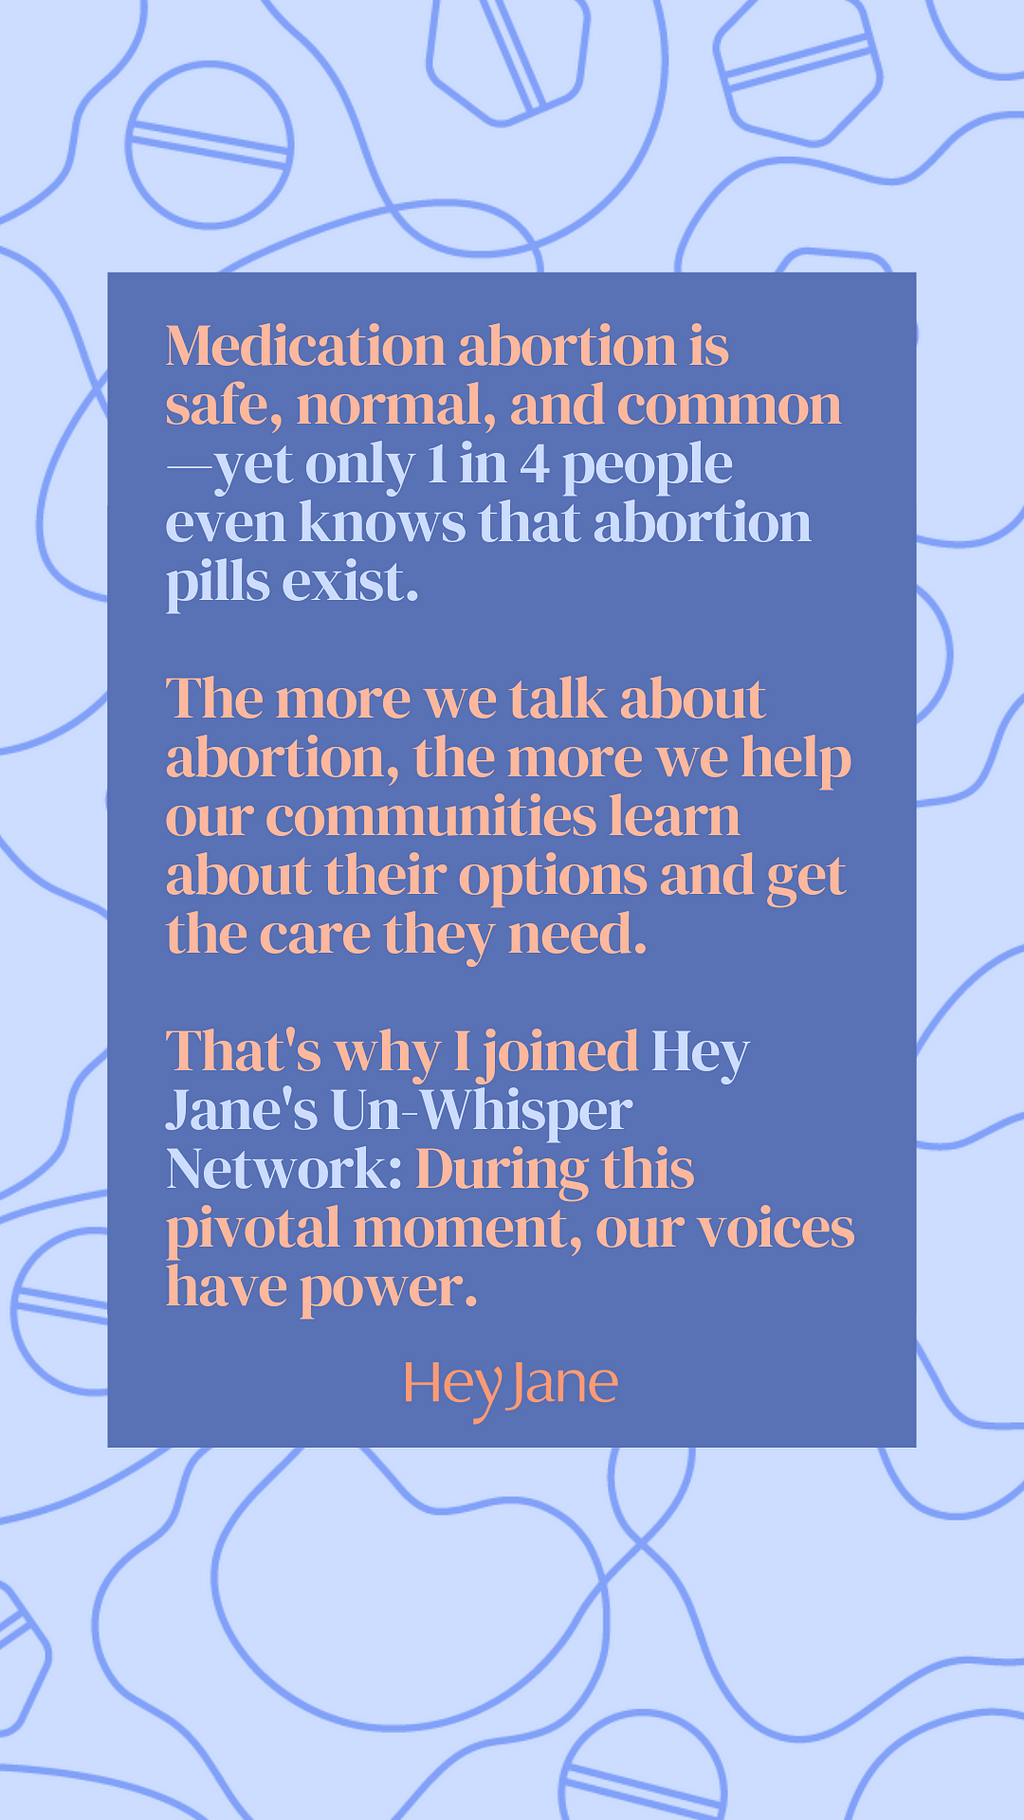 Sticker template with the following text: Medication abortion is safe, normal, and common — yet only 1 in 4 people even know that abortion pills exist. The more we talk about abortion, the more we help our communities learn about their options and get the care they need. That’s why I joined Hey Jane’s Un-Whisper Network: during this pivotal mooment, our voices have power. Hey Jane.